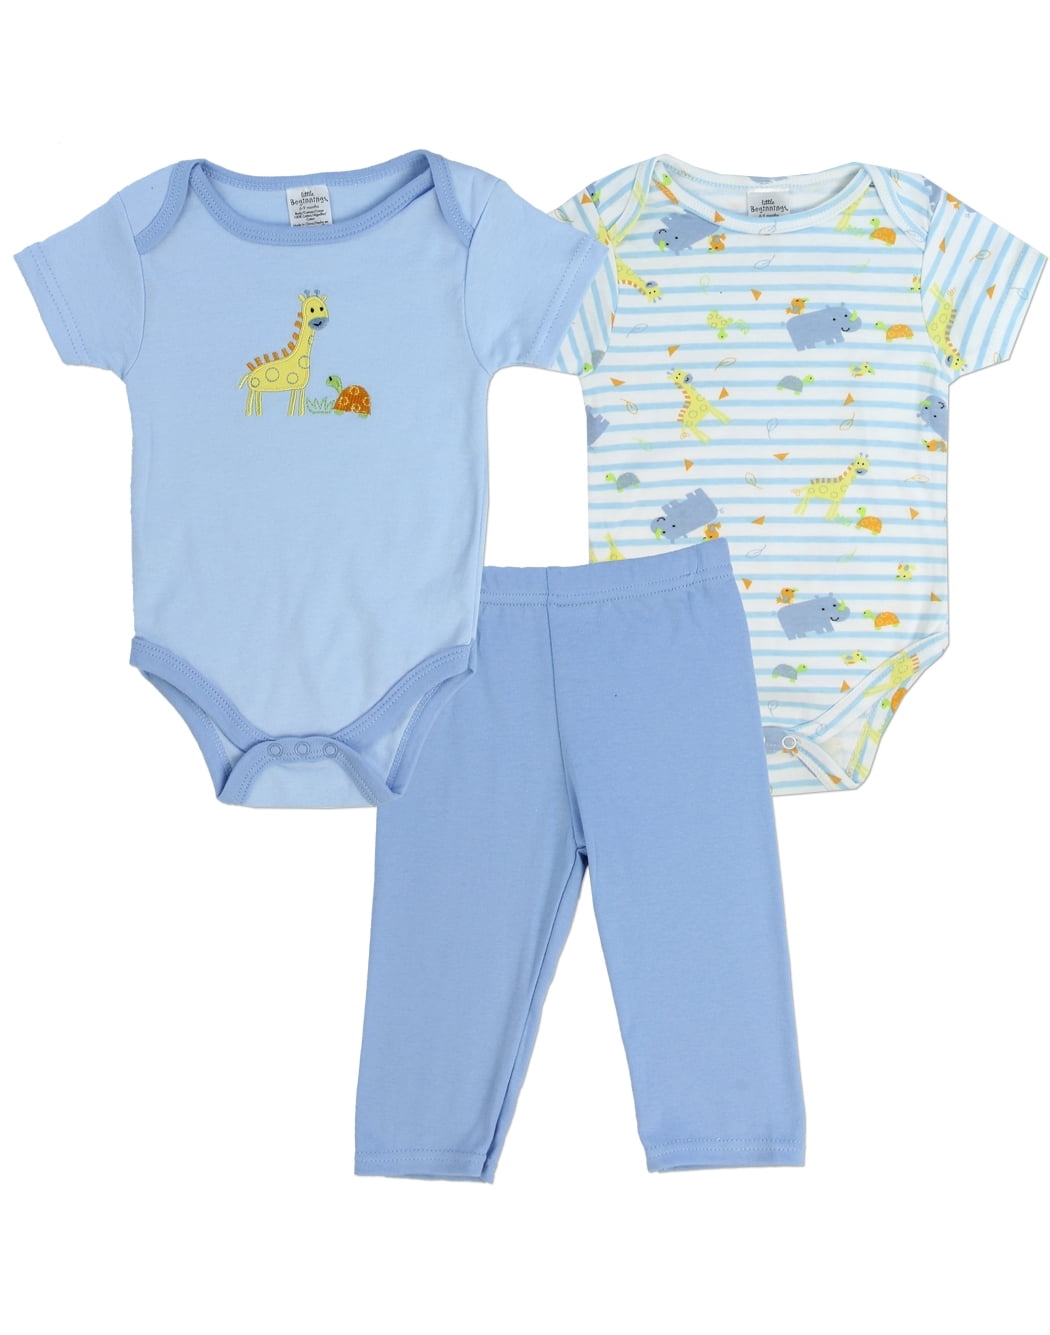 NEW Baby Boys Bodysuit 0-3 Months Blue Bear Plane Creeper Outfit 1 Piece Fly 